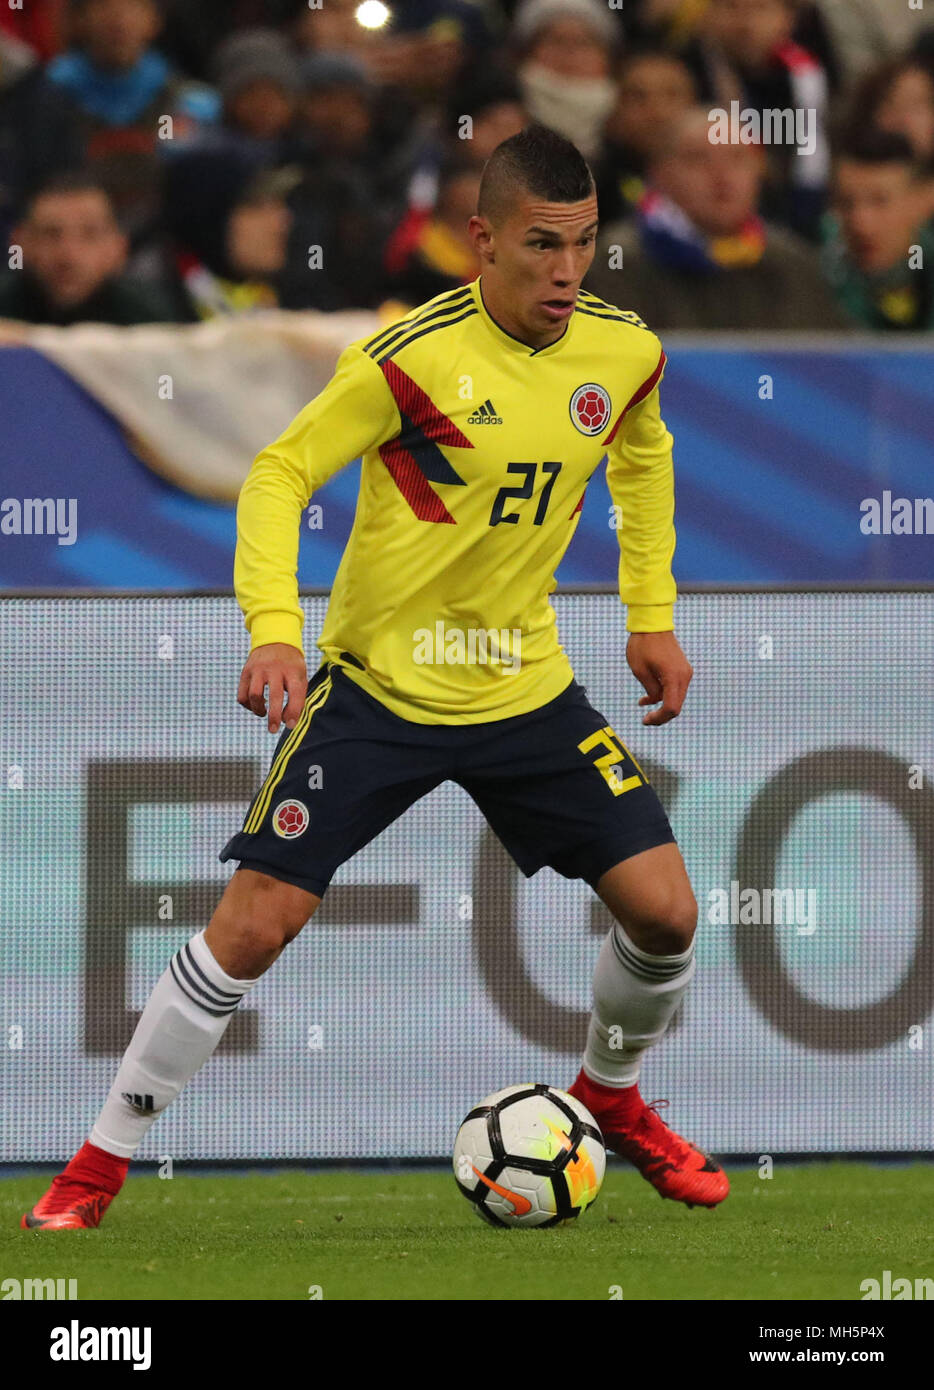 Mateus Uribe (COL), MARCH 23, 2018 - Football/Soccer : International friendly match between France 2-3 Colombia at Stade de France in Saint-Denis, France, Credit: AFLO/Alamy Live News Stock Photo